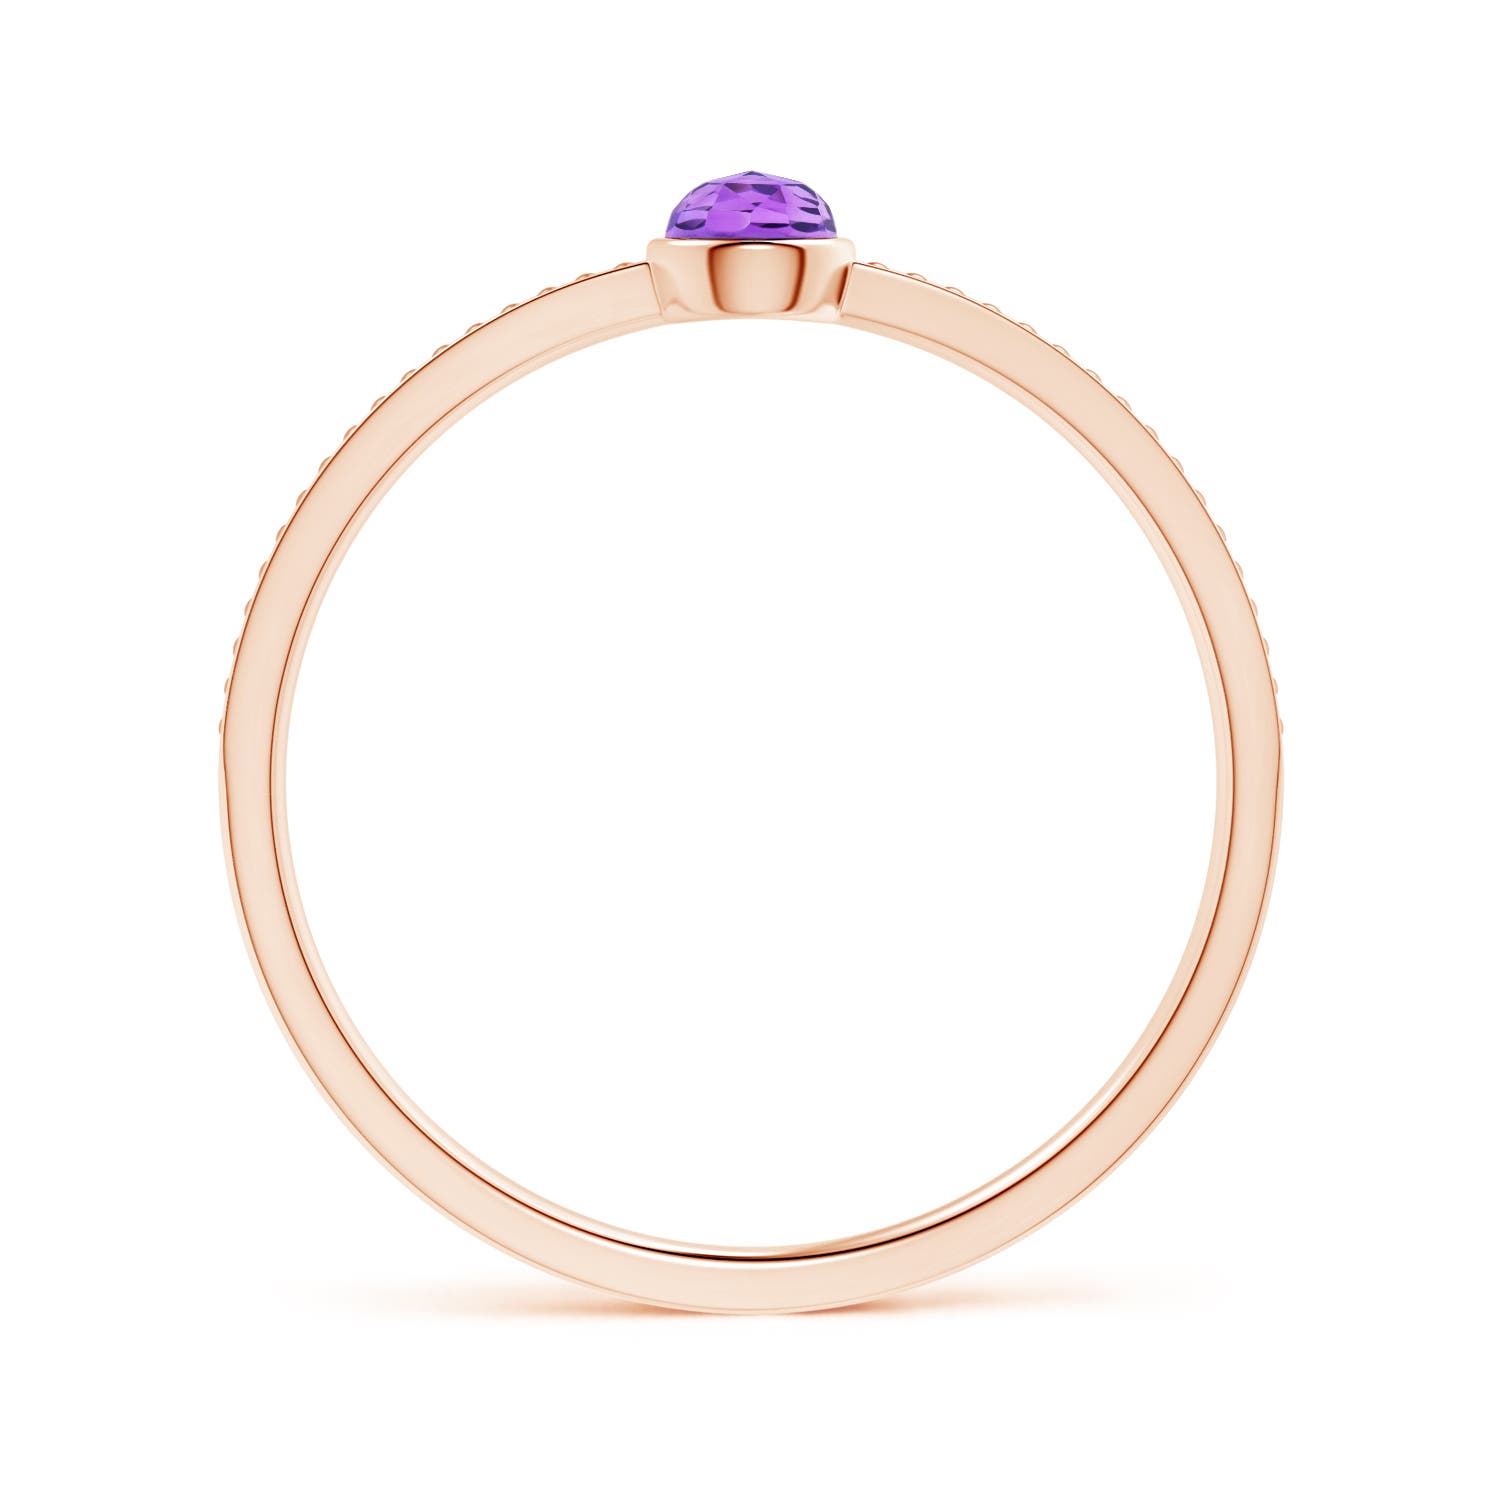 AAA - Amethyst / 0.17 CT / 14 KT Rose Gold